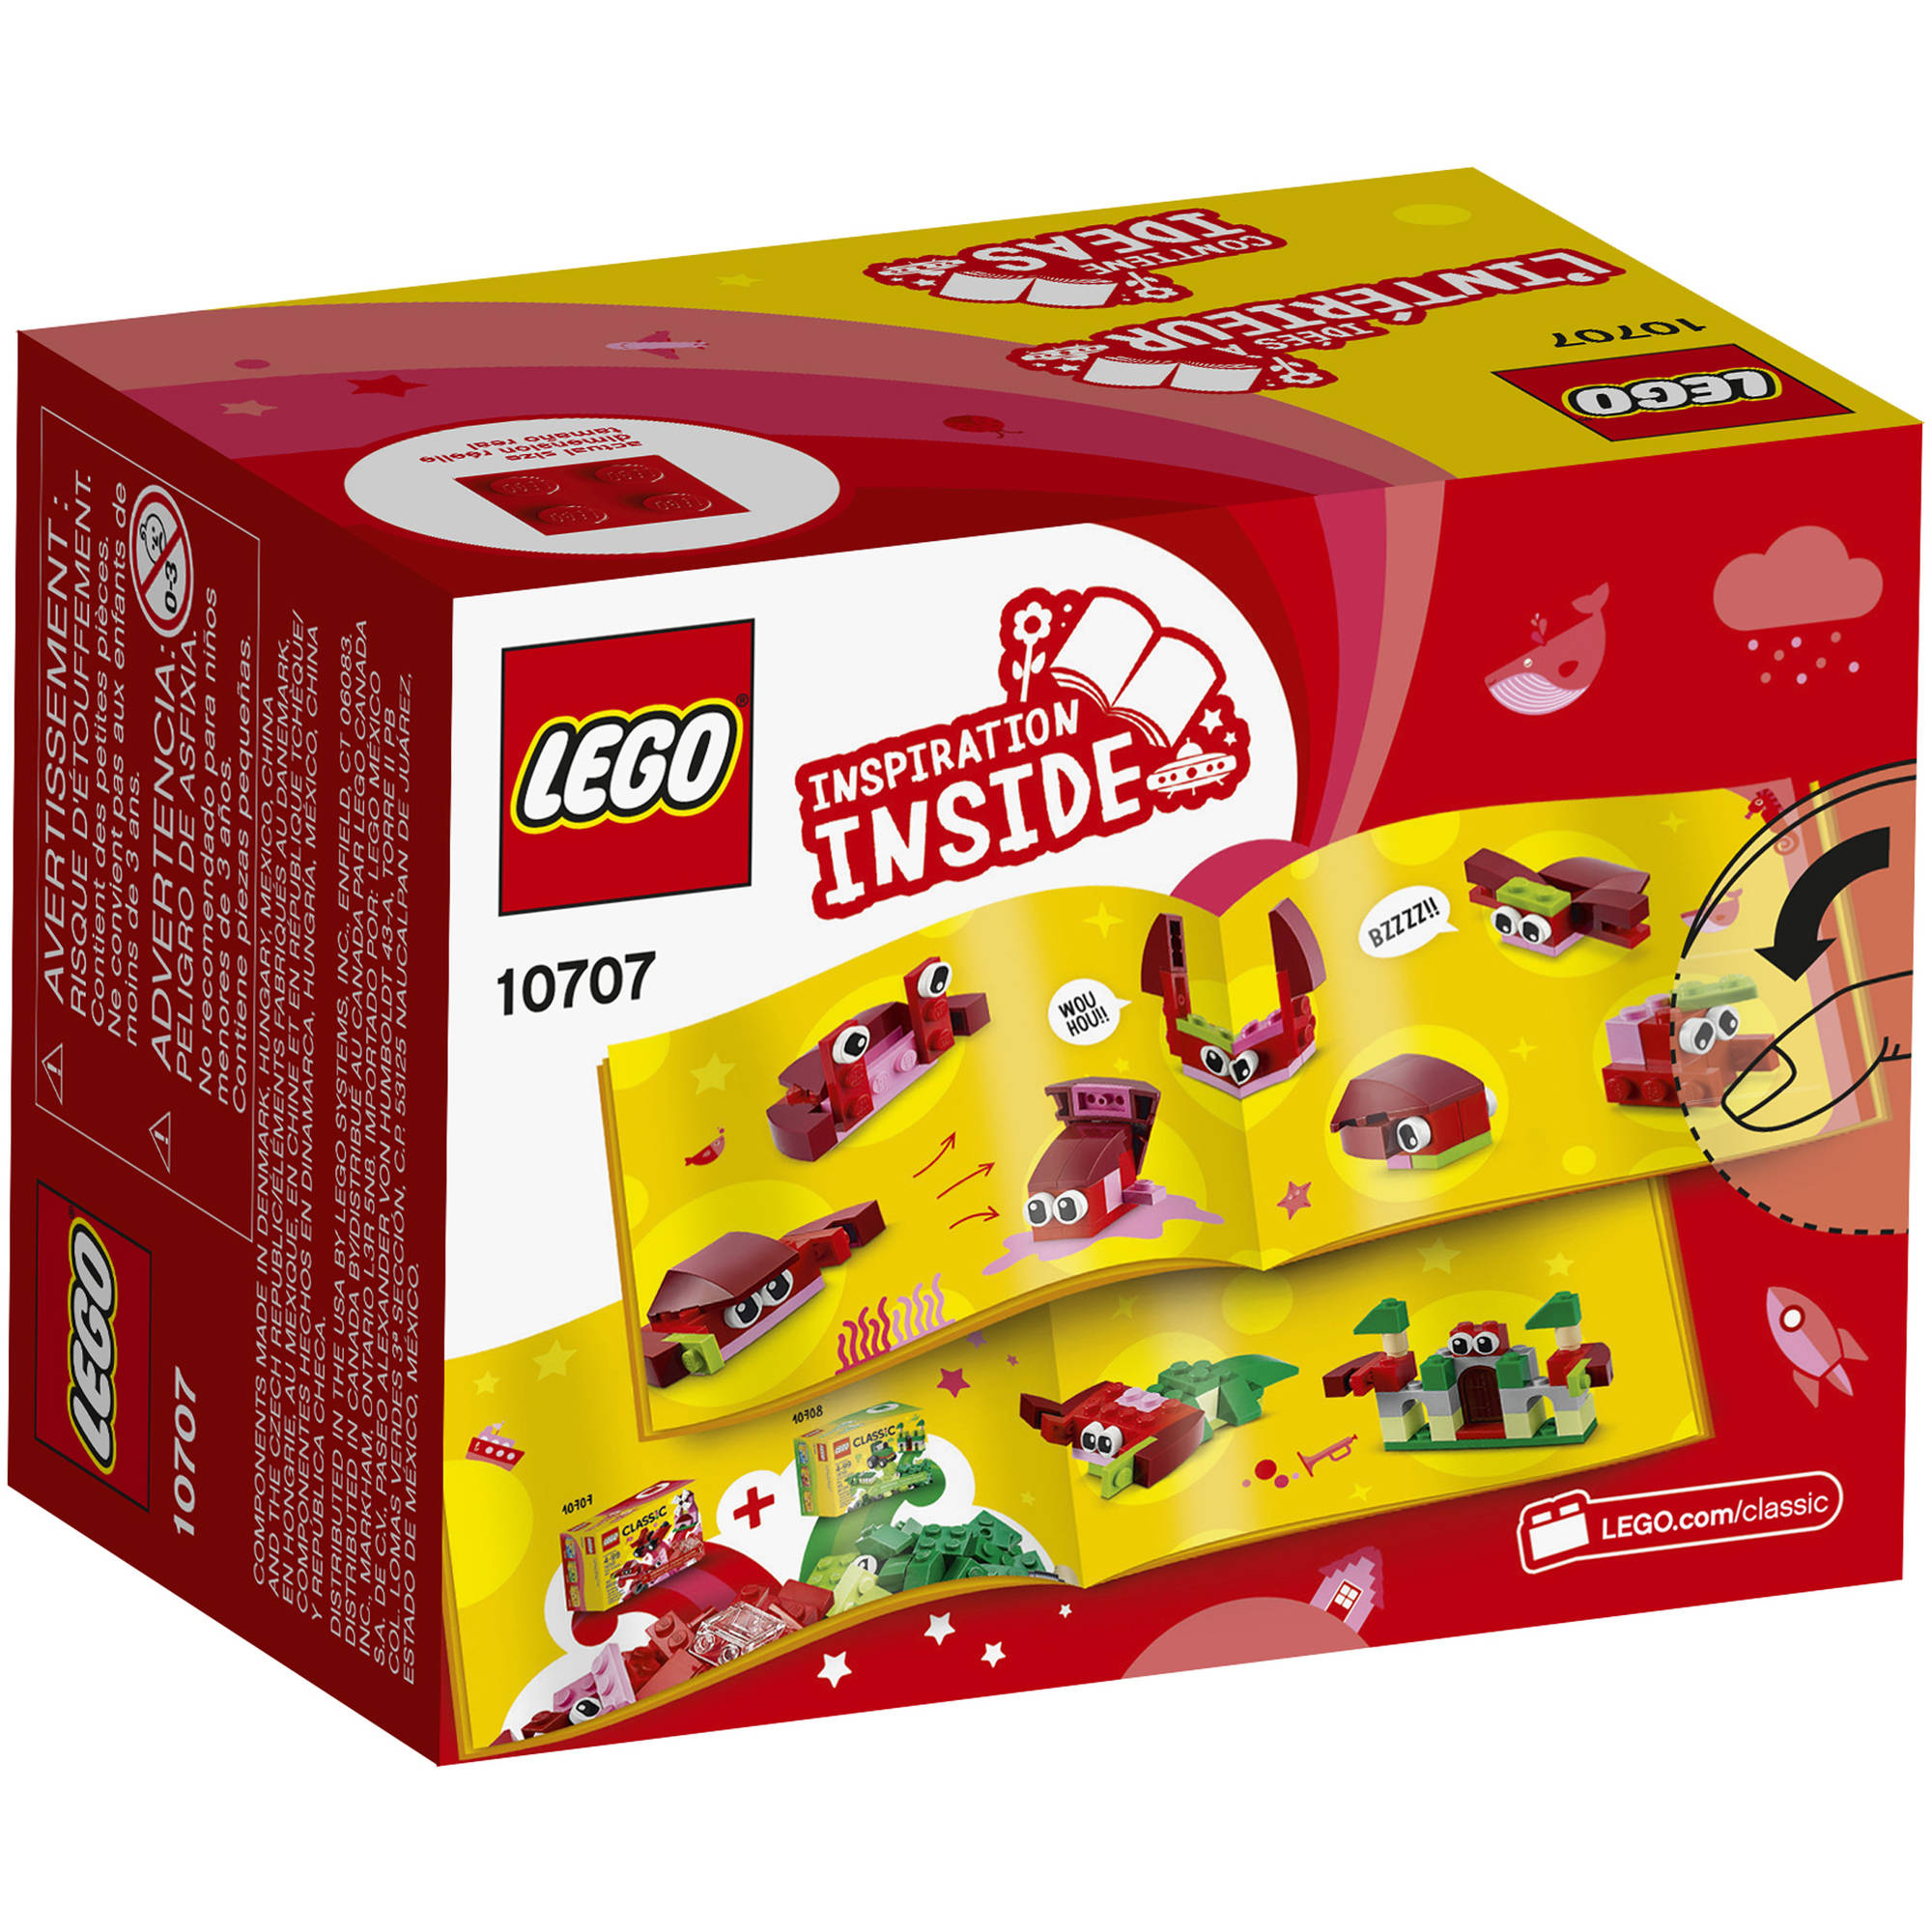 LEGO Classic Creativity Box, Red 10707 (55 Pieces) - image 3 of 8